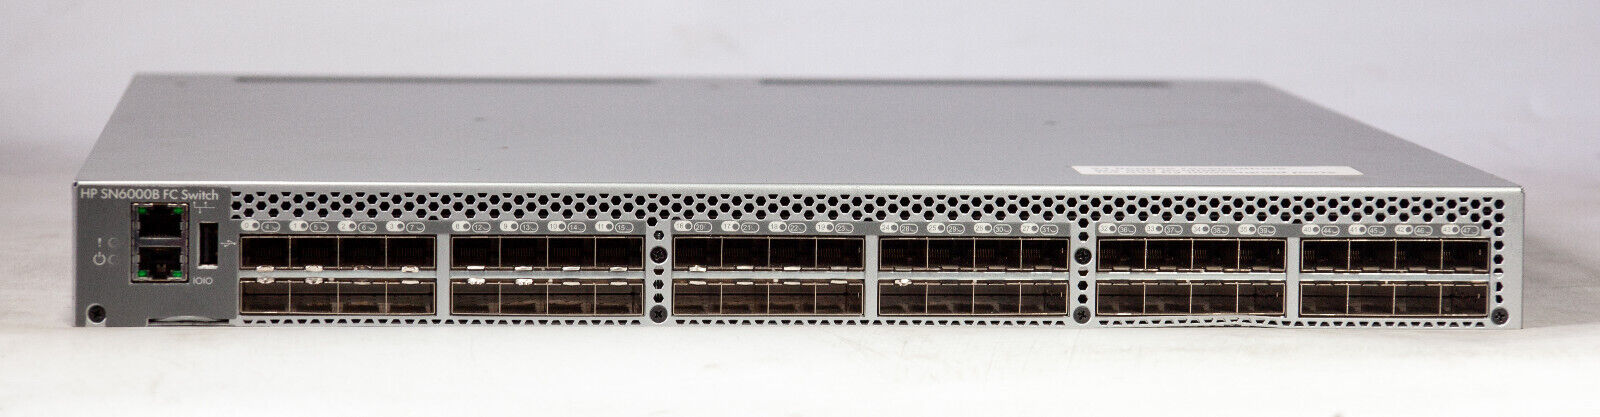 HP SN6000B 16GB 48-P  FIBRE CHANNEL SWITCH - 24 license reservations